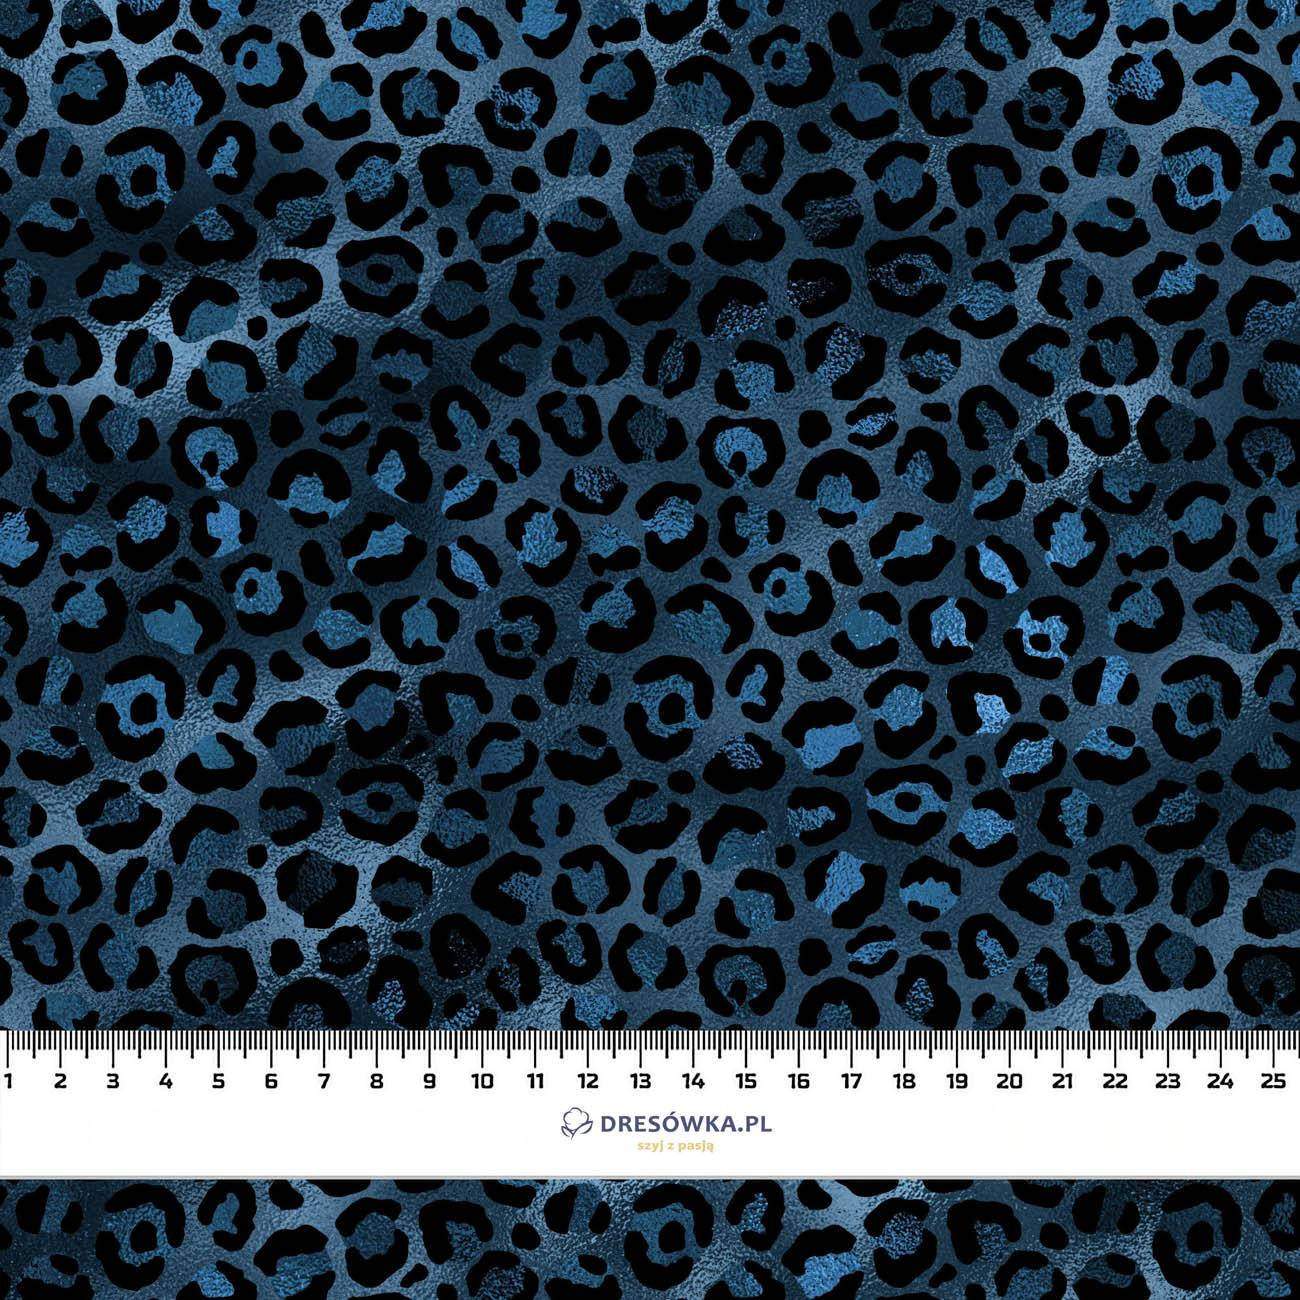 LEOPARD / SPOTS PAT. 2 - quick-drying woven fabric